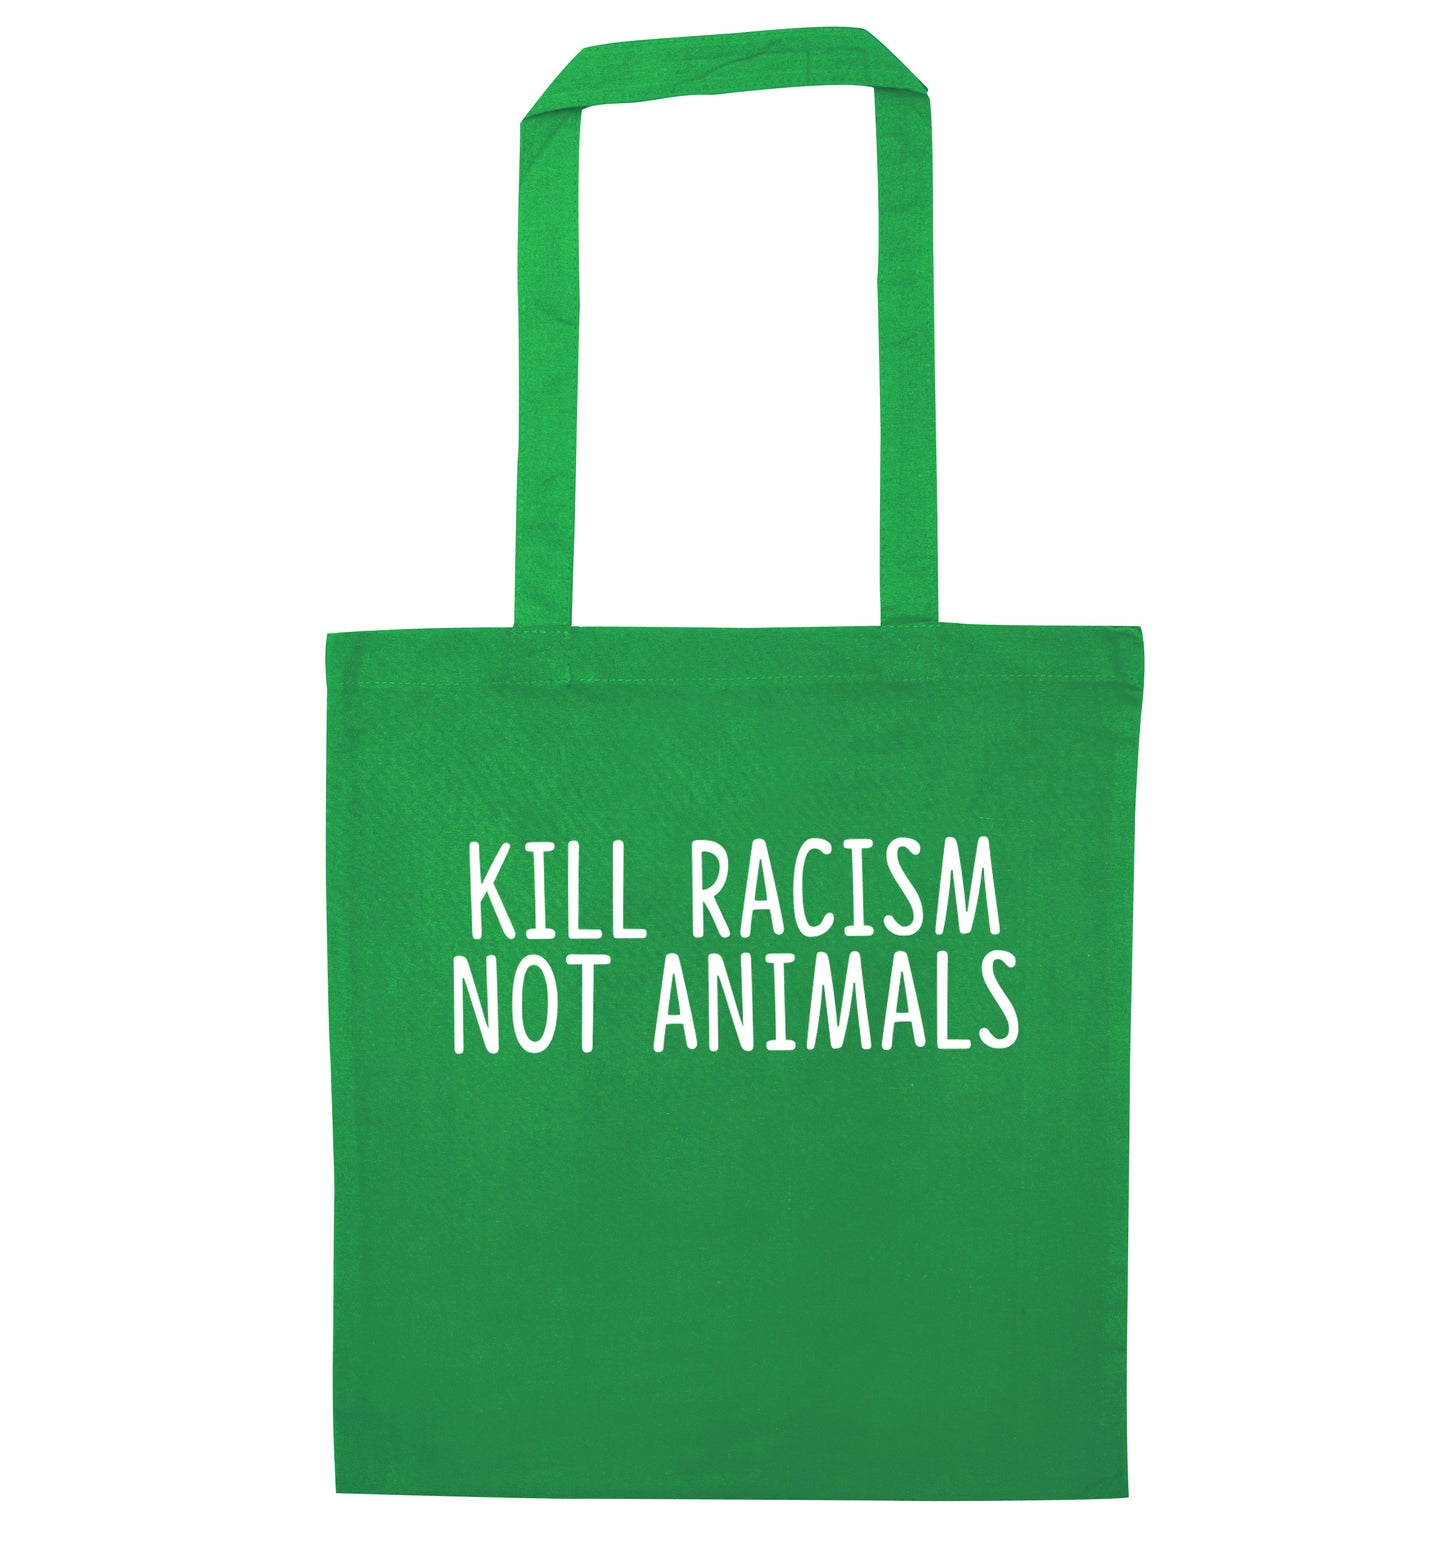 Kill Racism Not Animals green tote bag